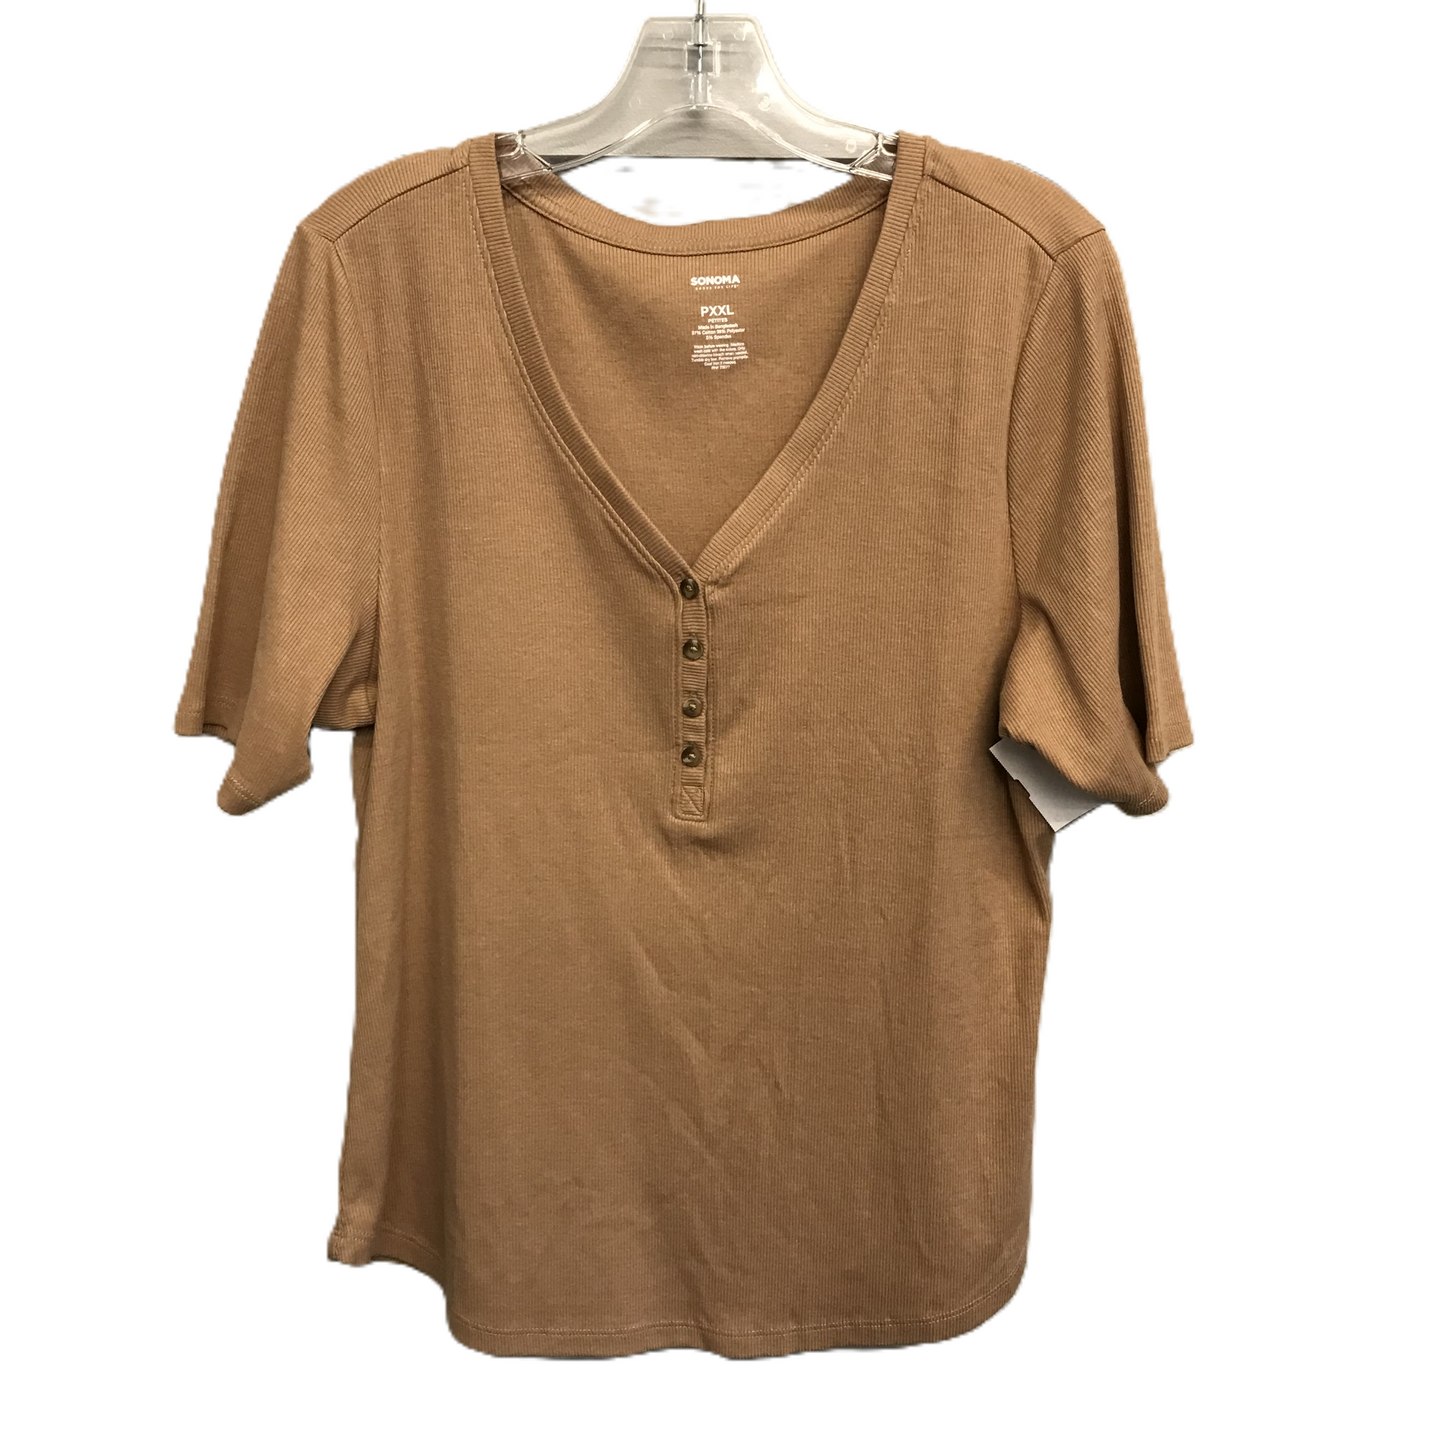 Brown Top Short Sleeve Basic By Sonoma, Size: 1x